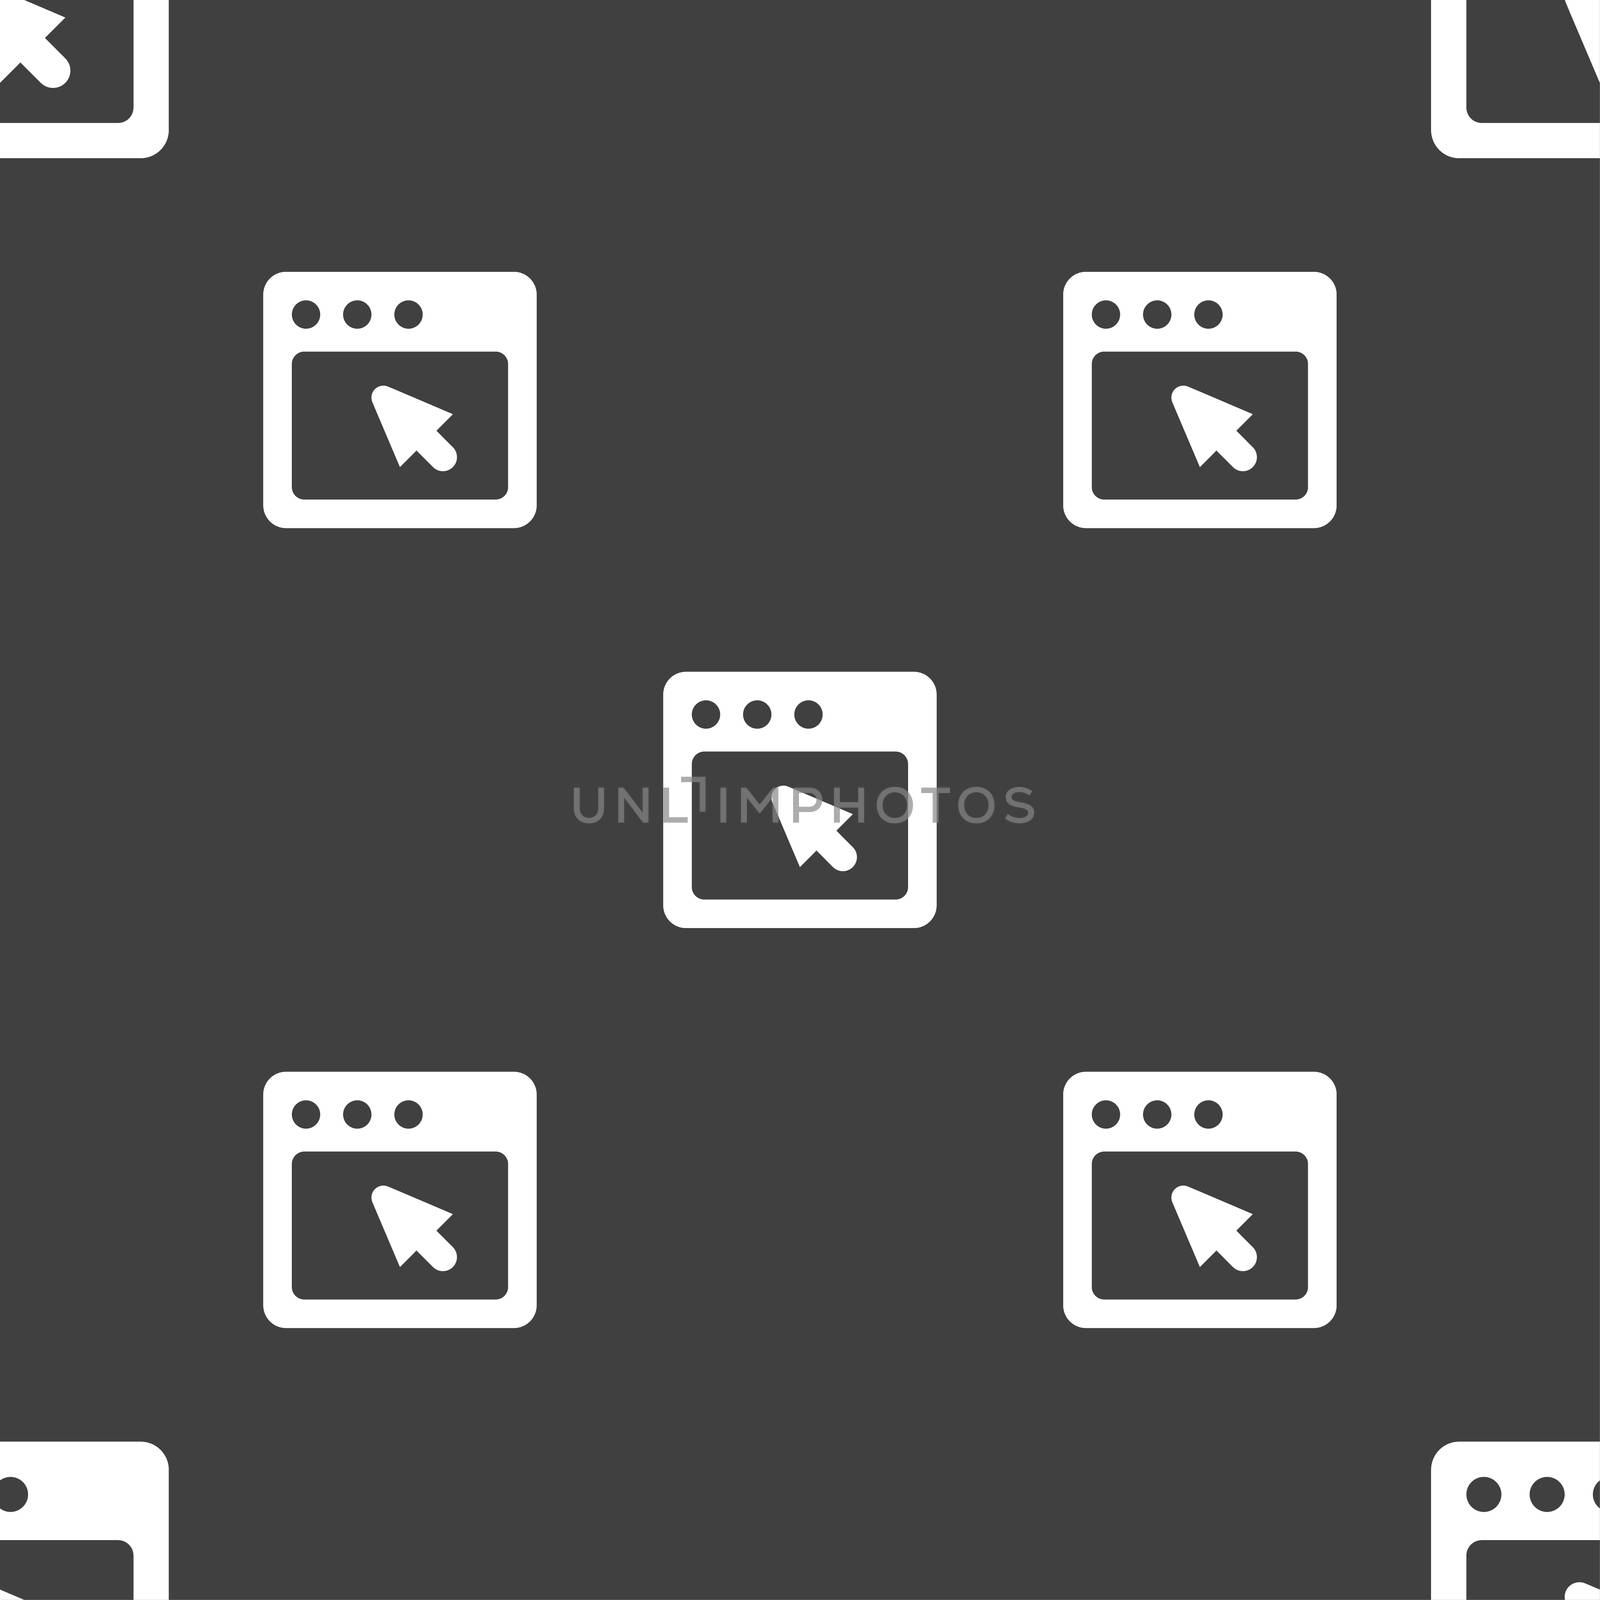 the dialog box icon sign. Seamless pattern on a gray background. illustration